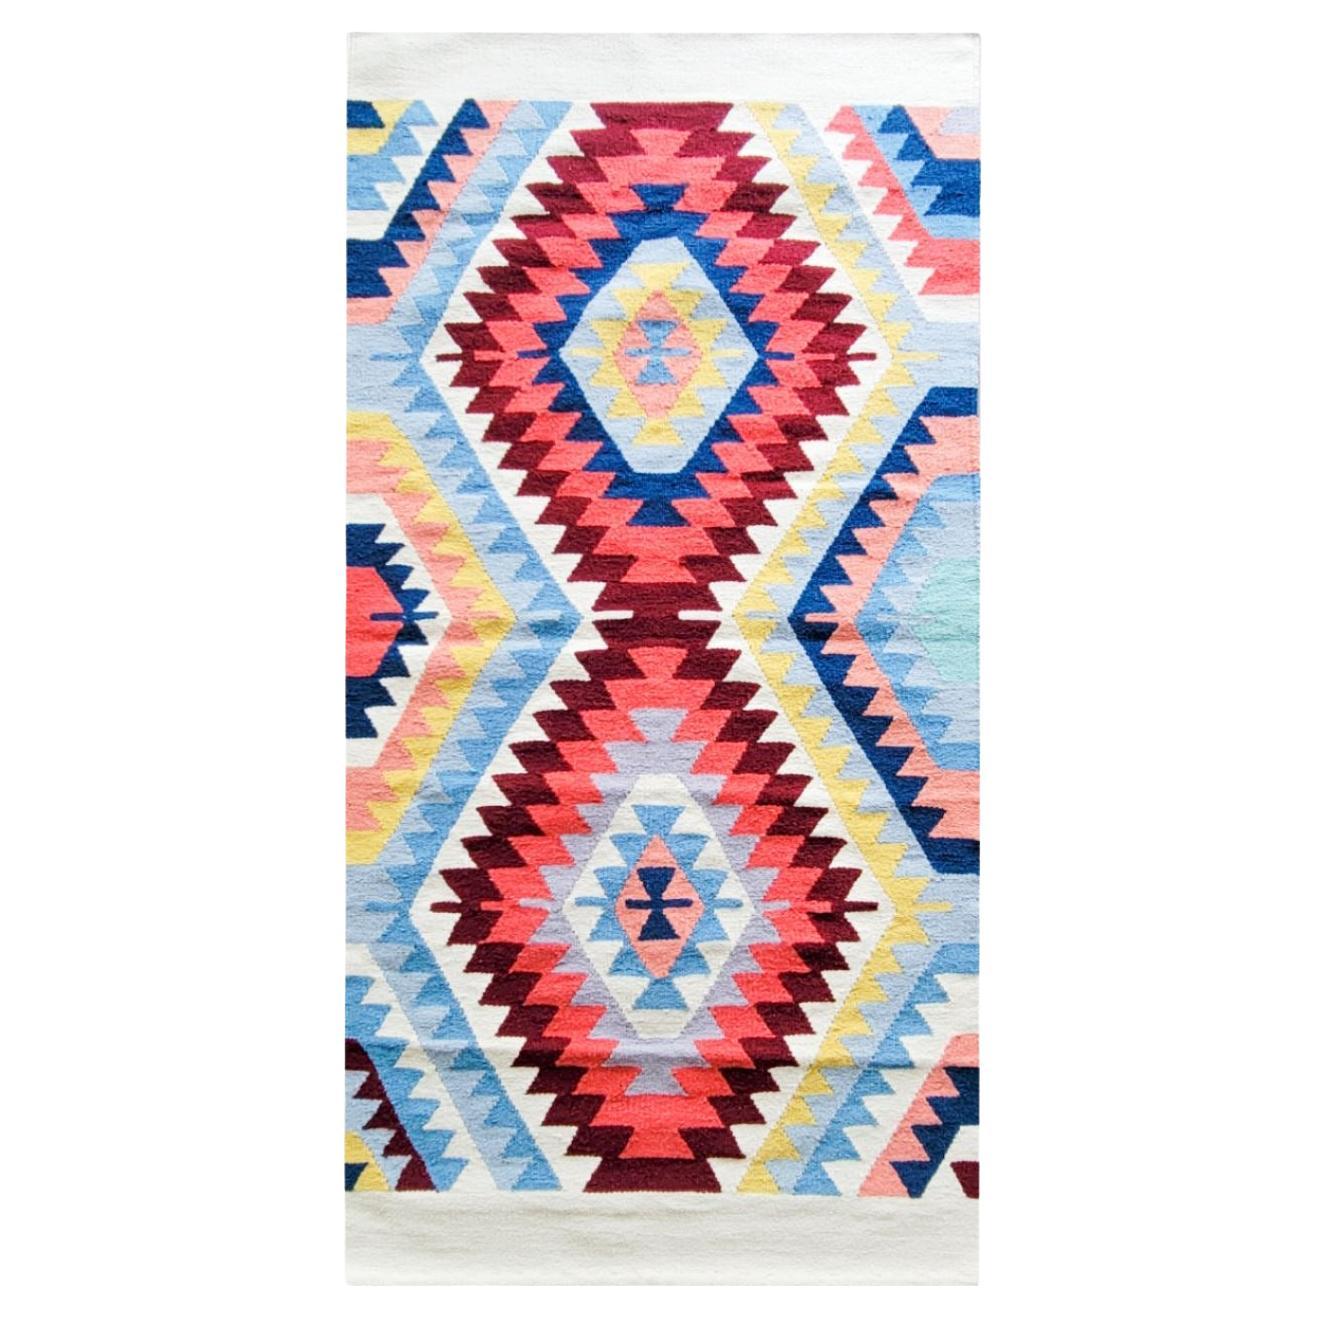 Luxor Handwoven colorful Rug Kilim 4' X 6' For Sale